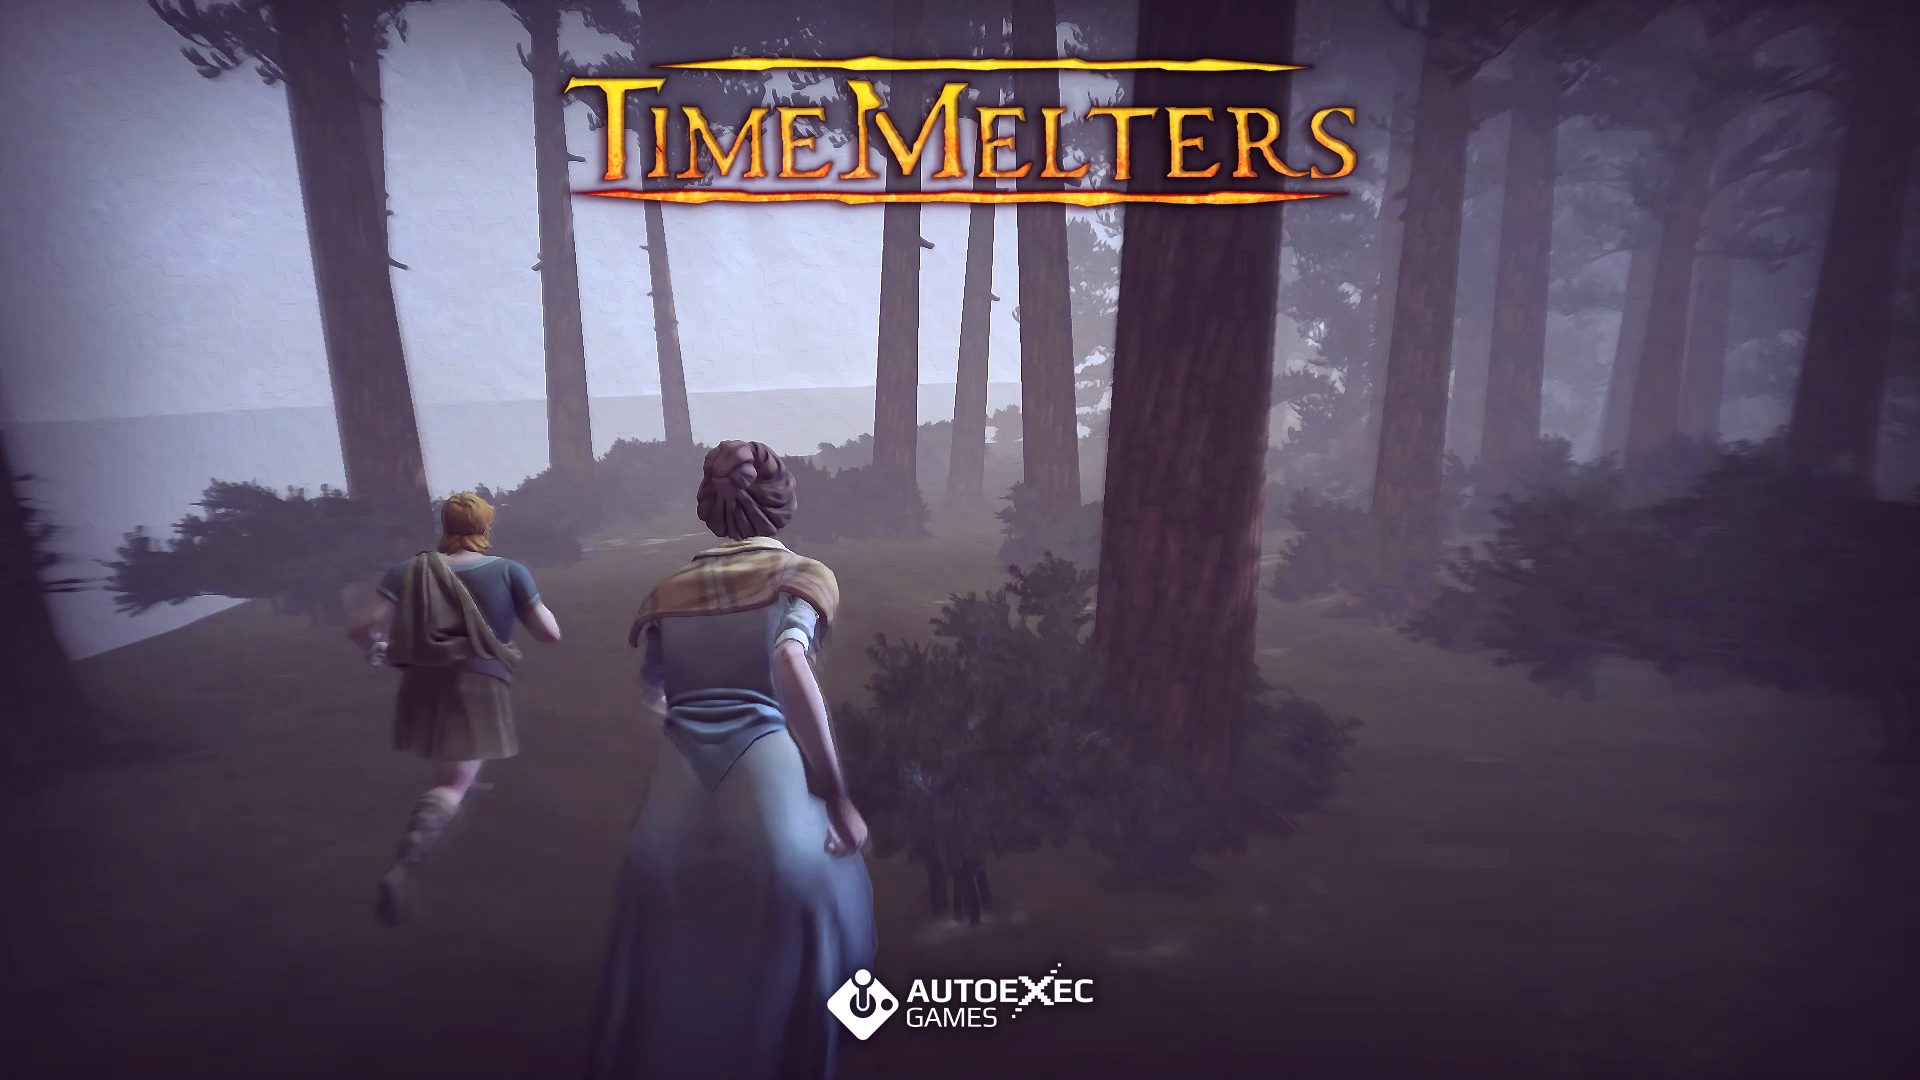 TimeMelters wins BIG at NYX